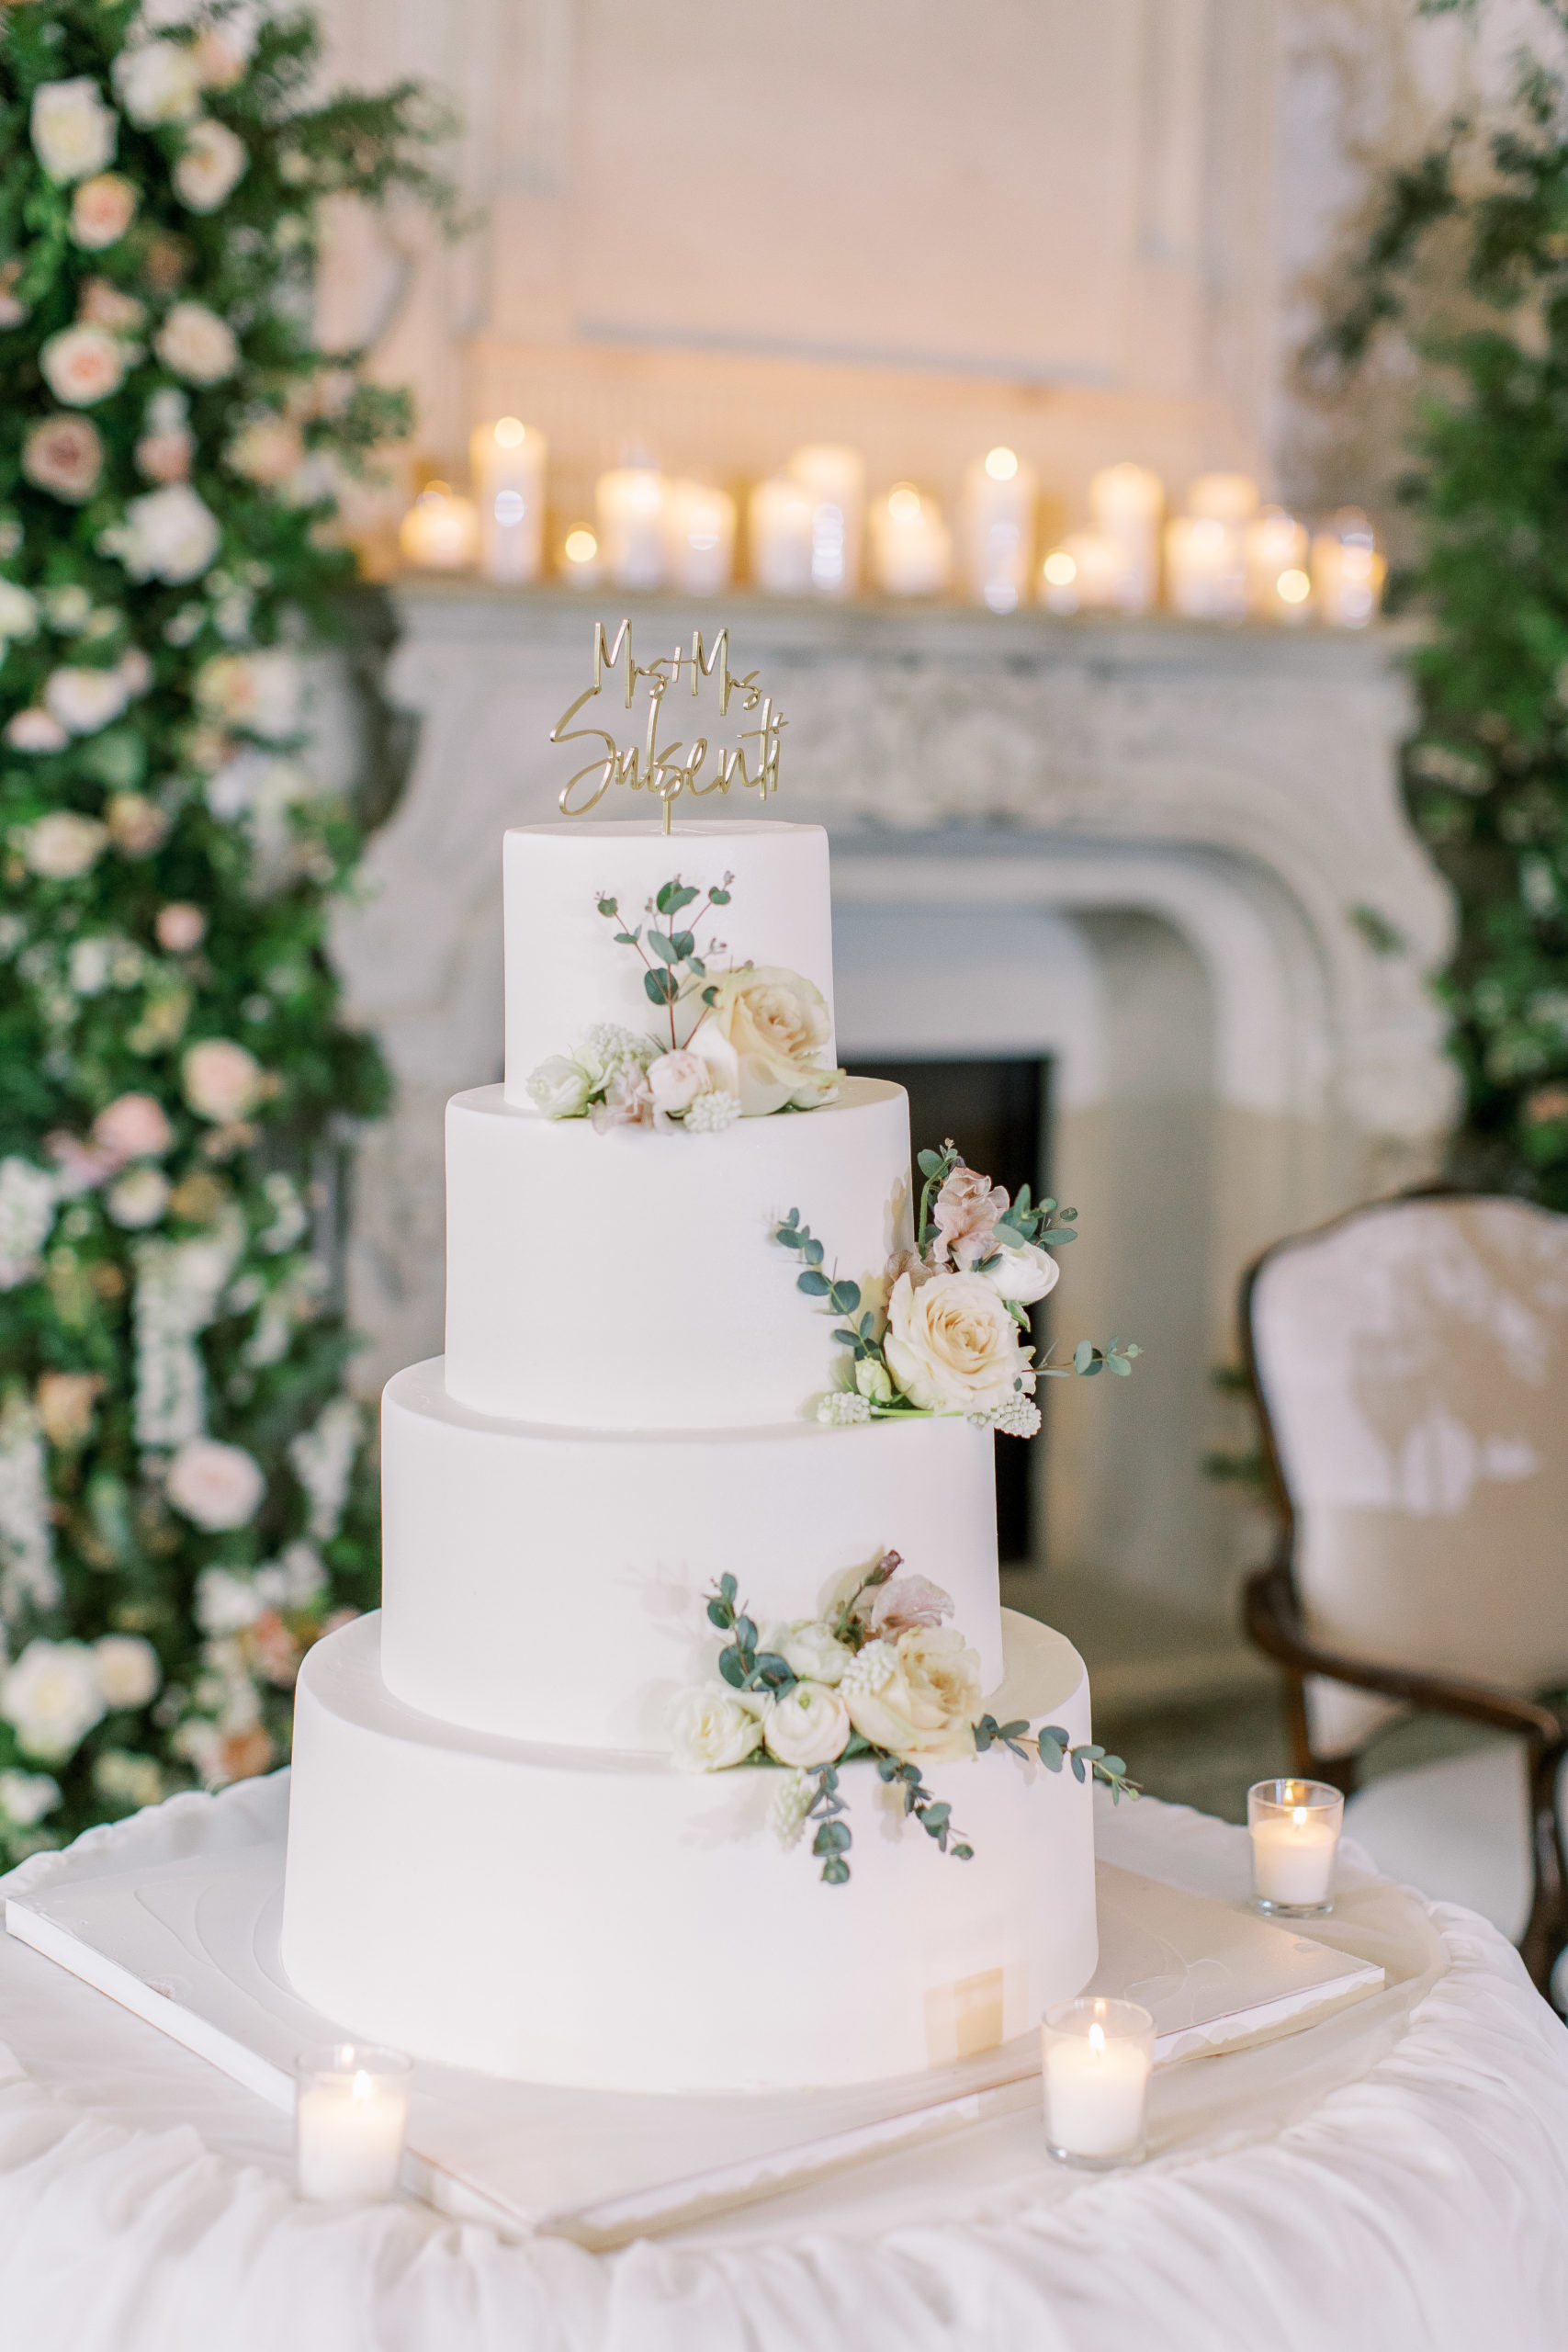 4-tiered white wedding cake with ivory and peach roses at a Romantic Park Chateau Wedding Photography